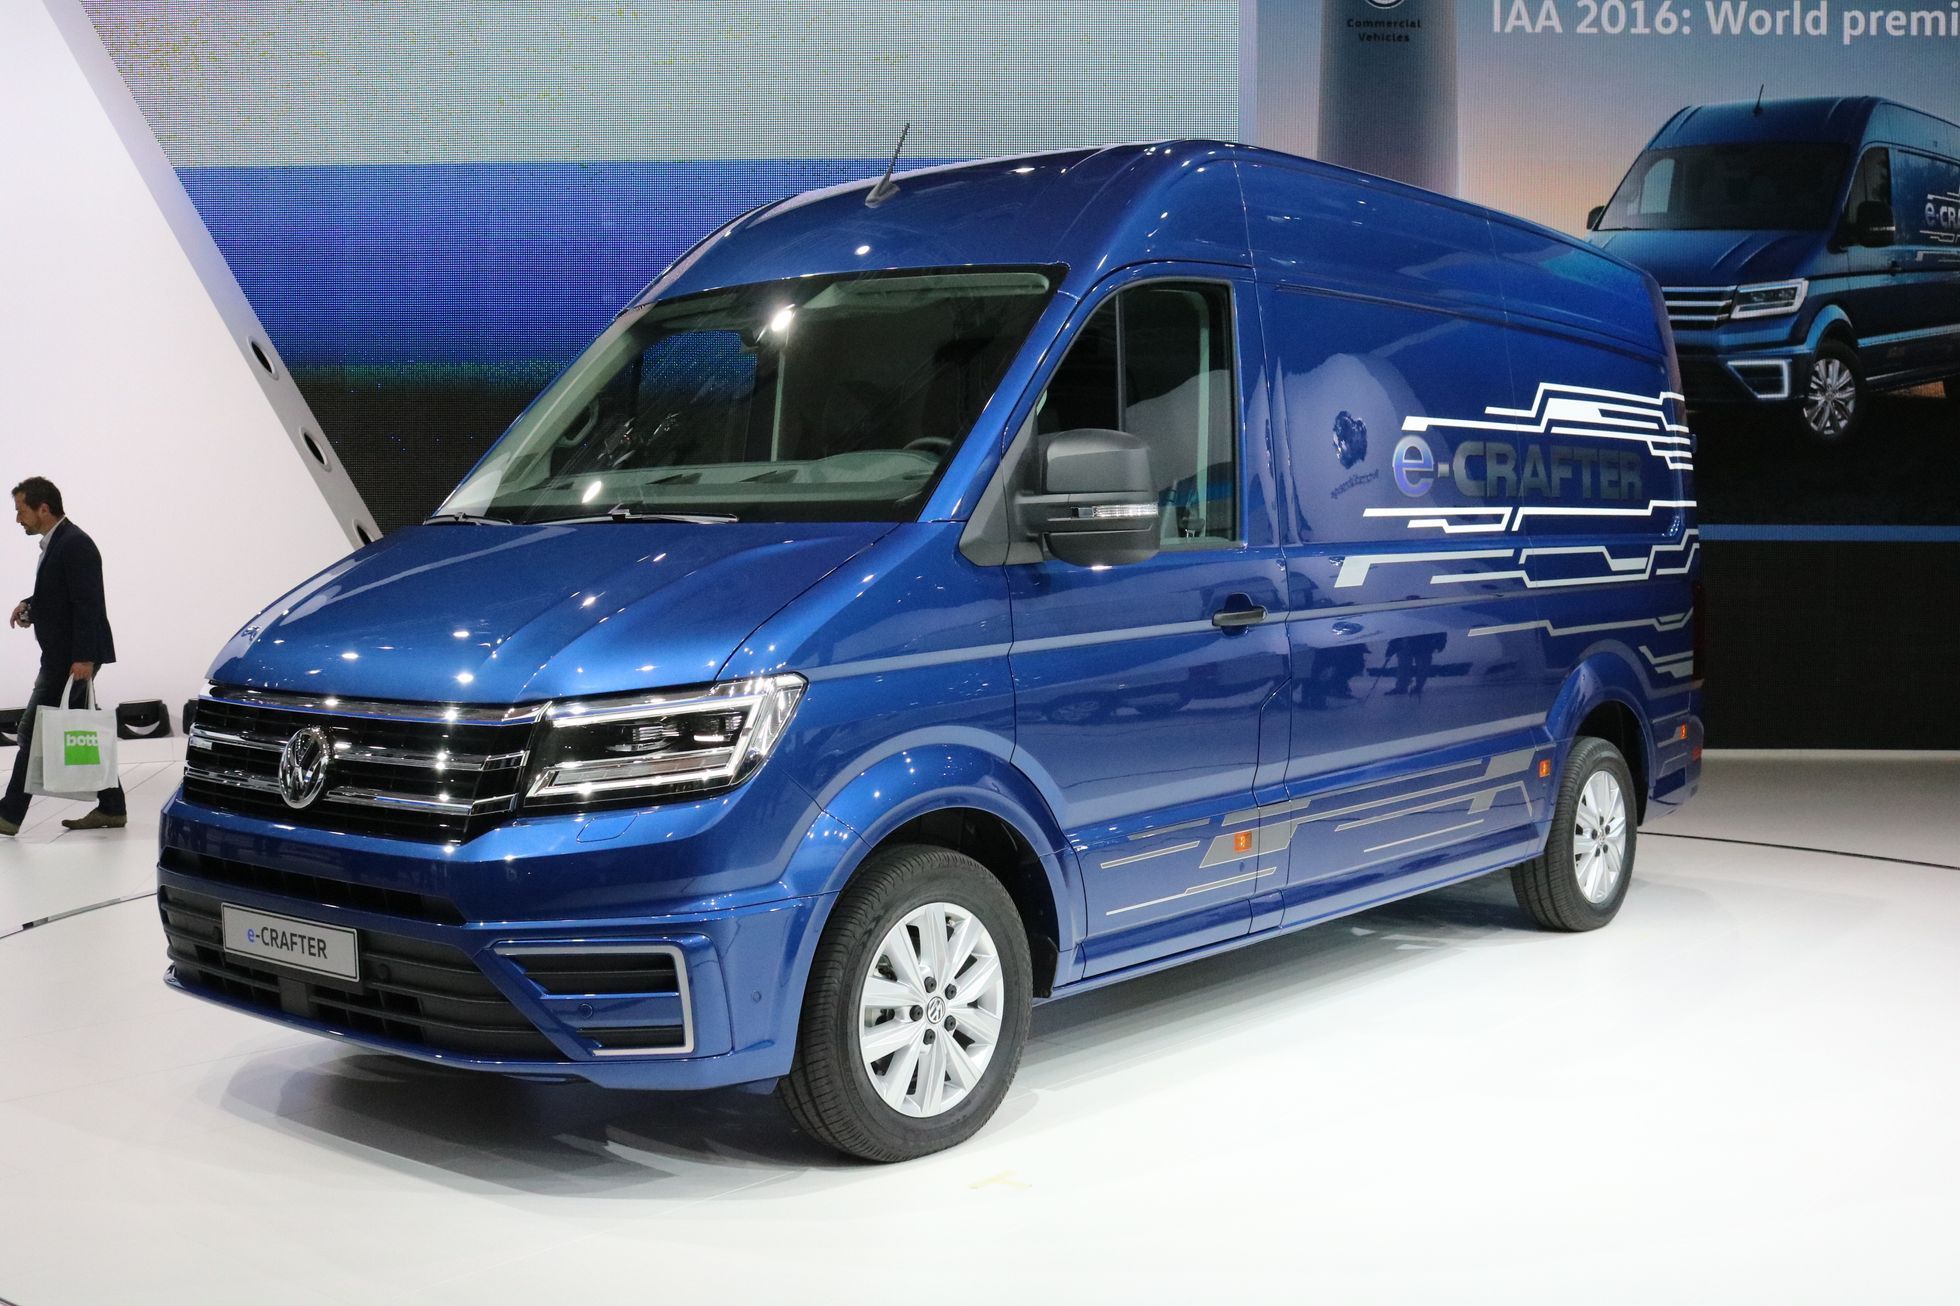 IAA Hannover - VW e-Crafter